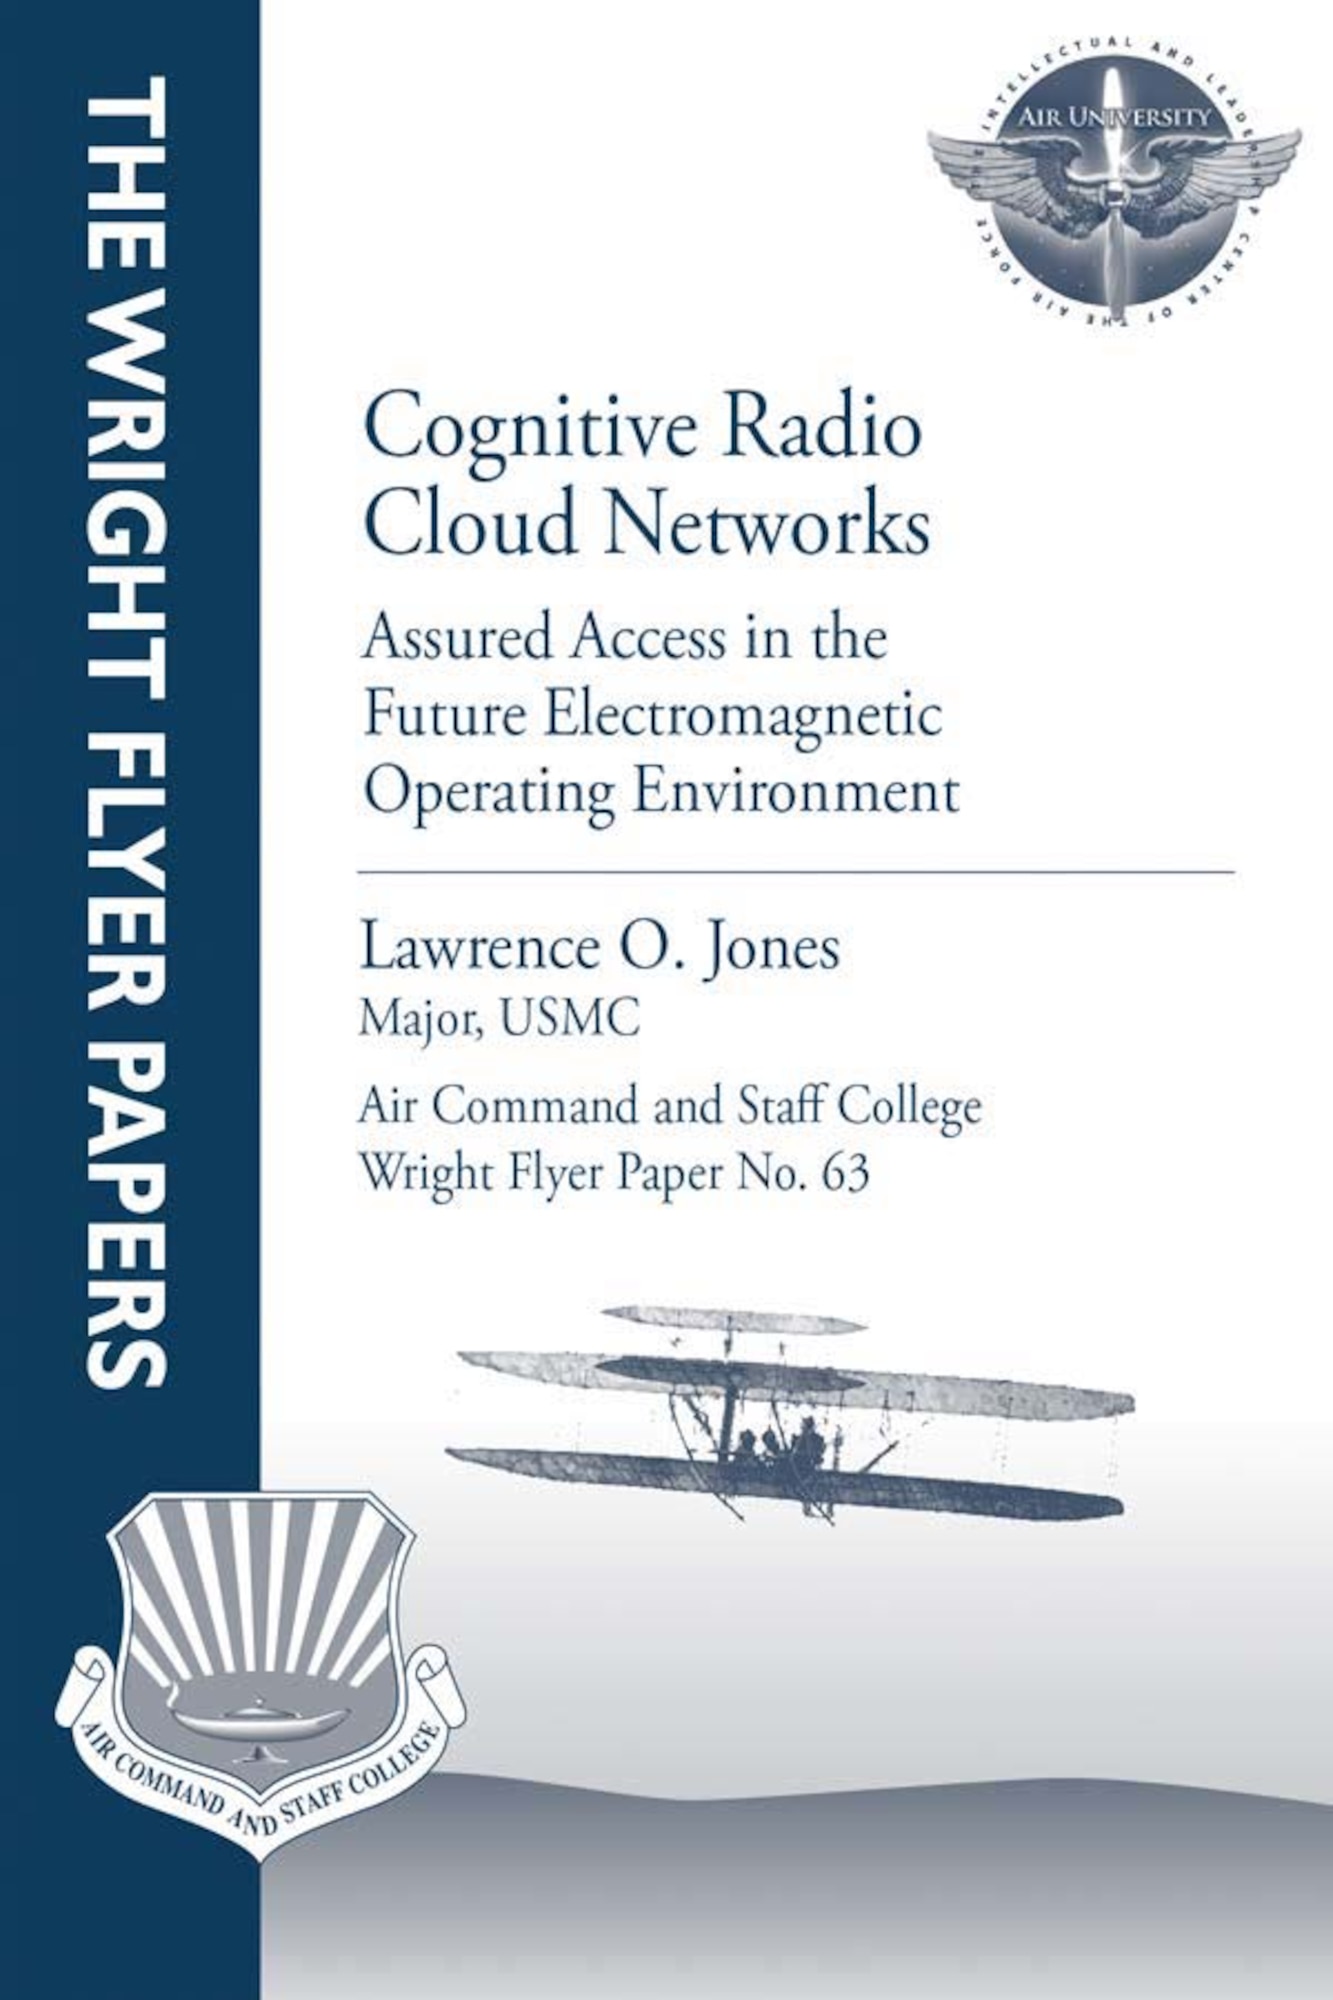 Wright Flyer Paper No. 63, Cognitive Radio Cloud Networks: Assured Access in the Future Electromagnetic Operating Environment